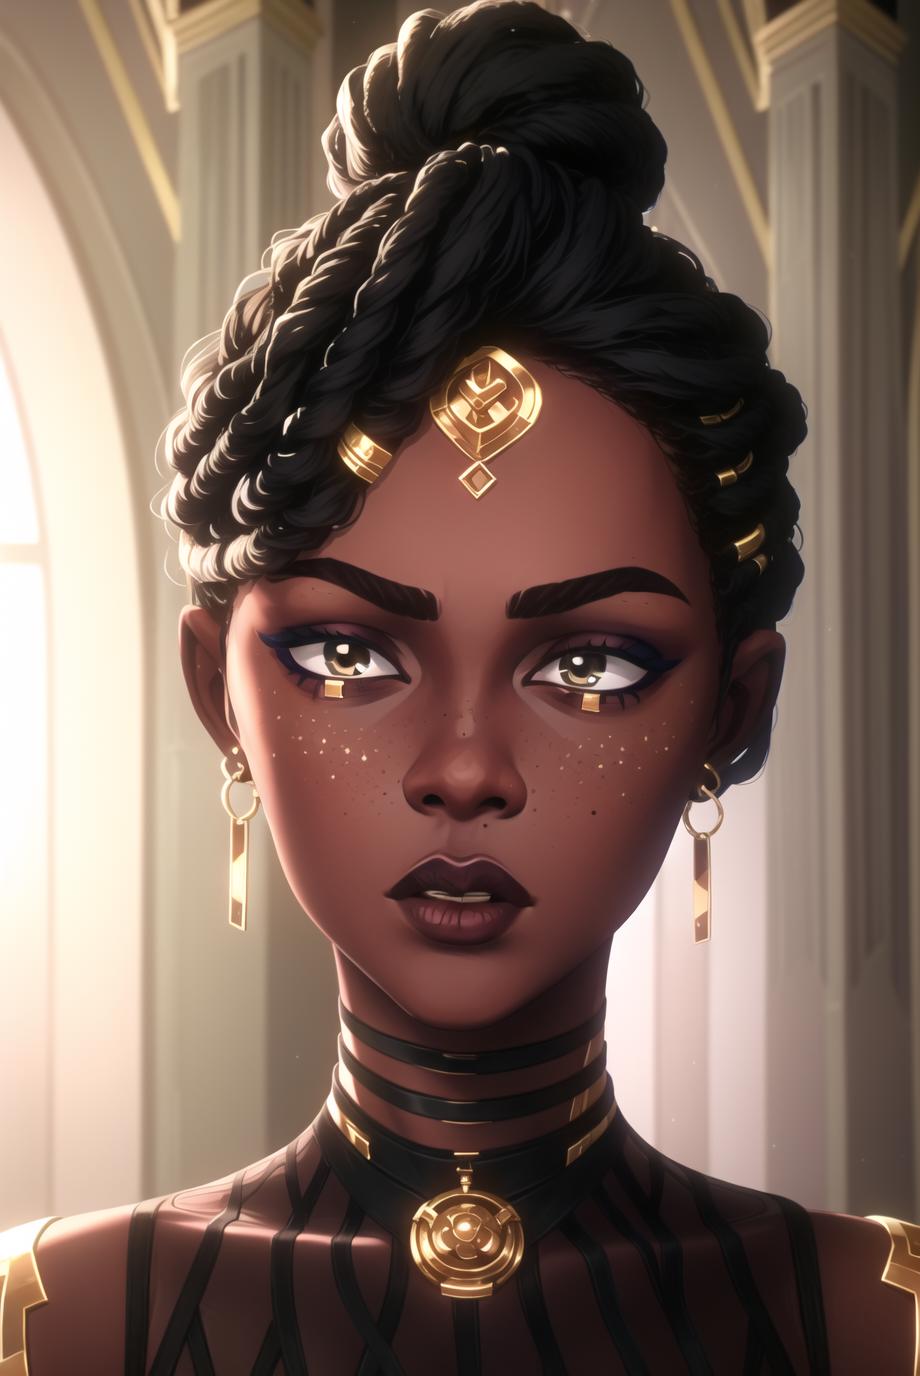 A woman with braids and gold earrings wearing a gold headband.